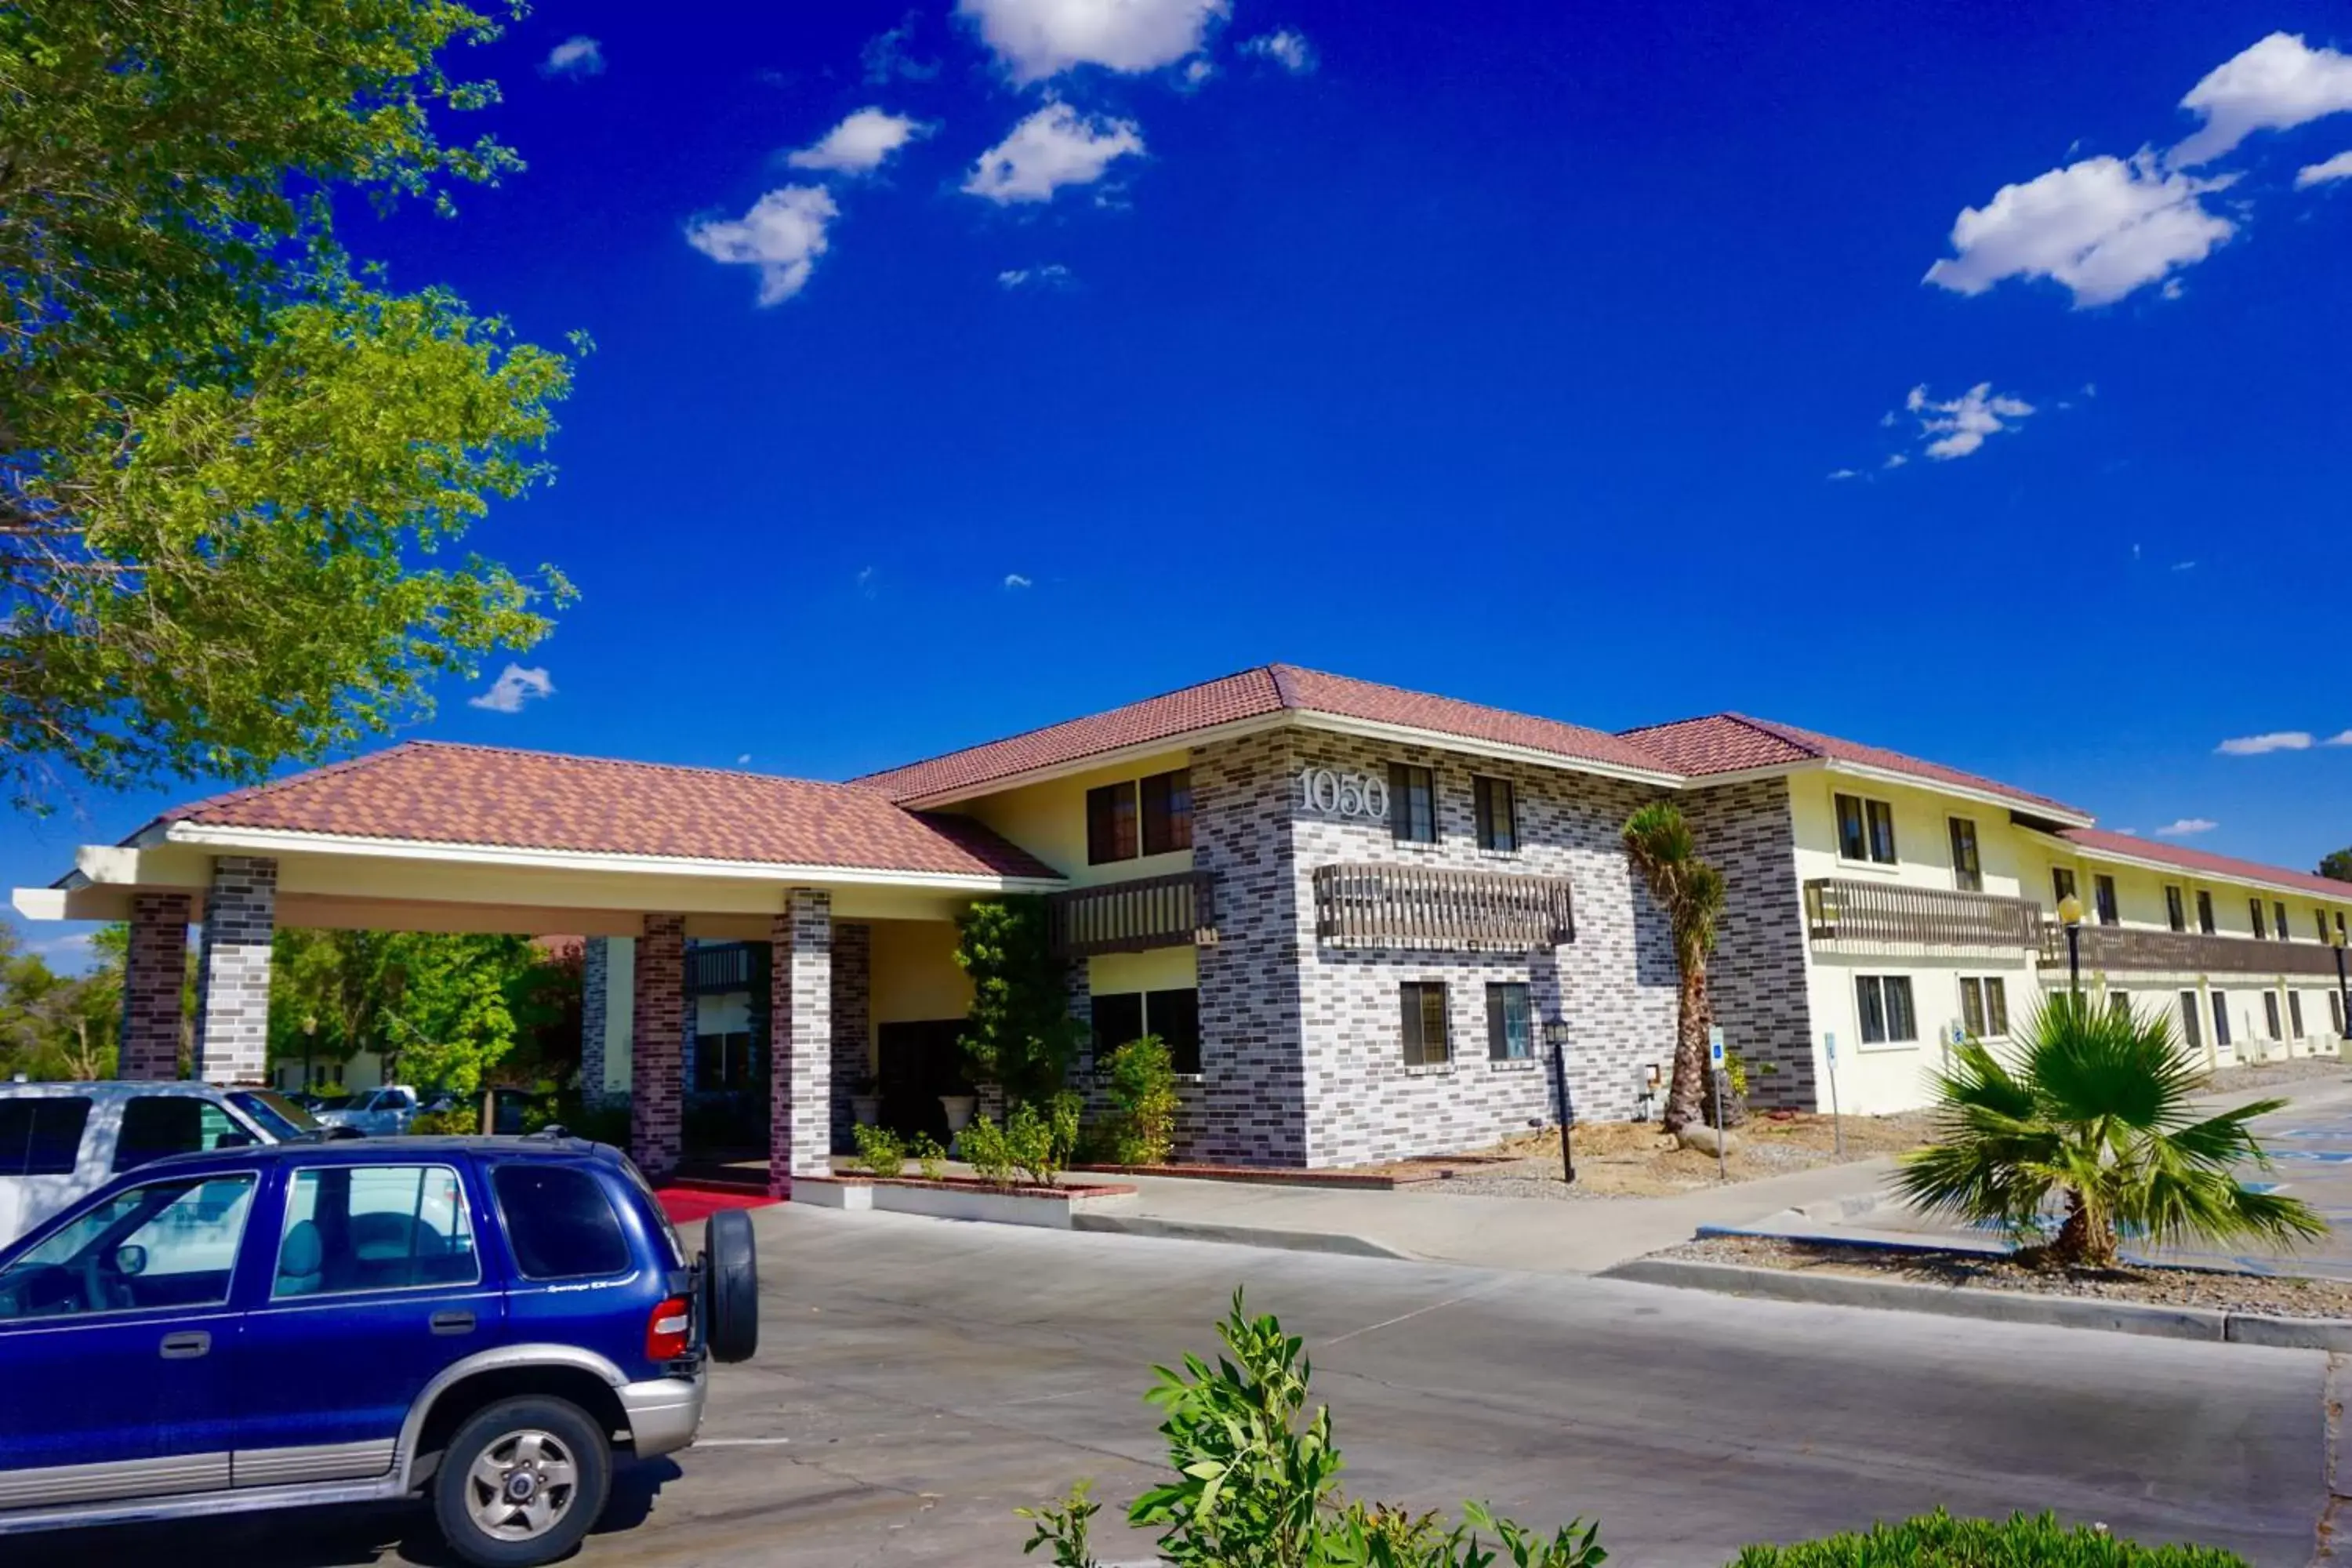 Property building, Facade/Entrance in Heritage Inn & Suites Ridgecrest - China Lake